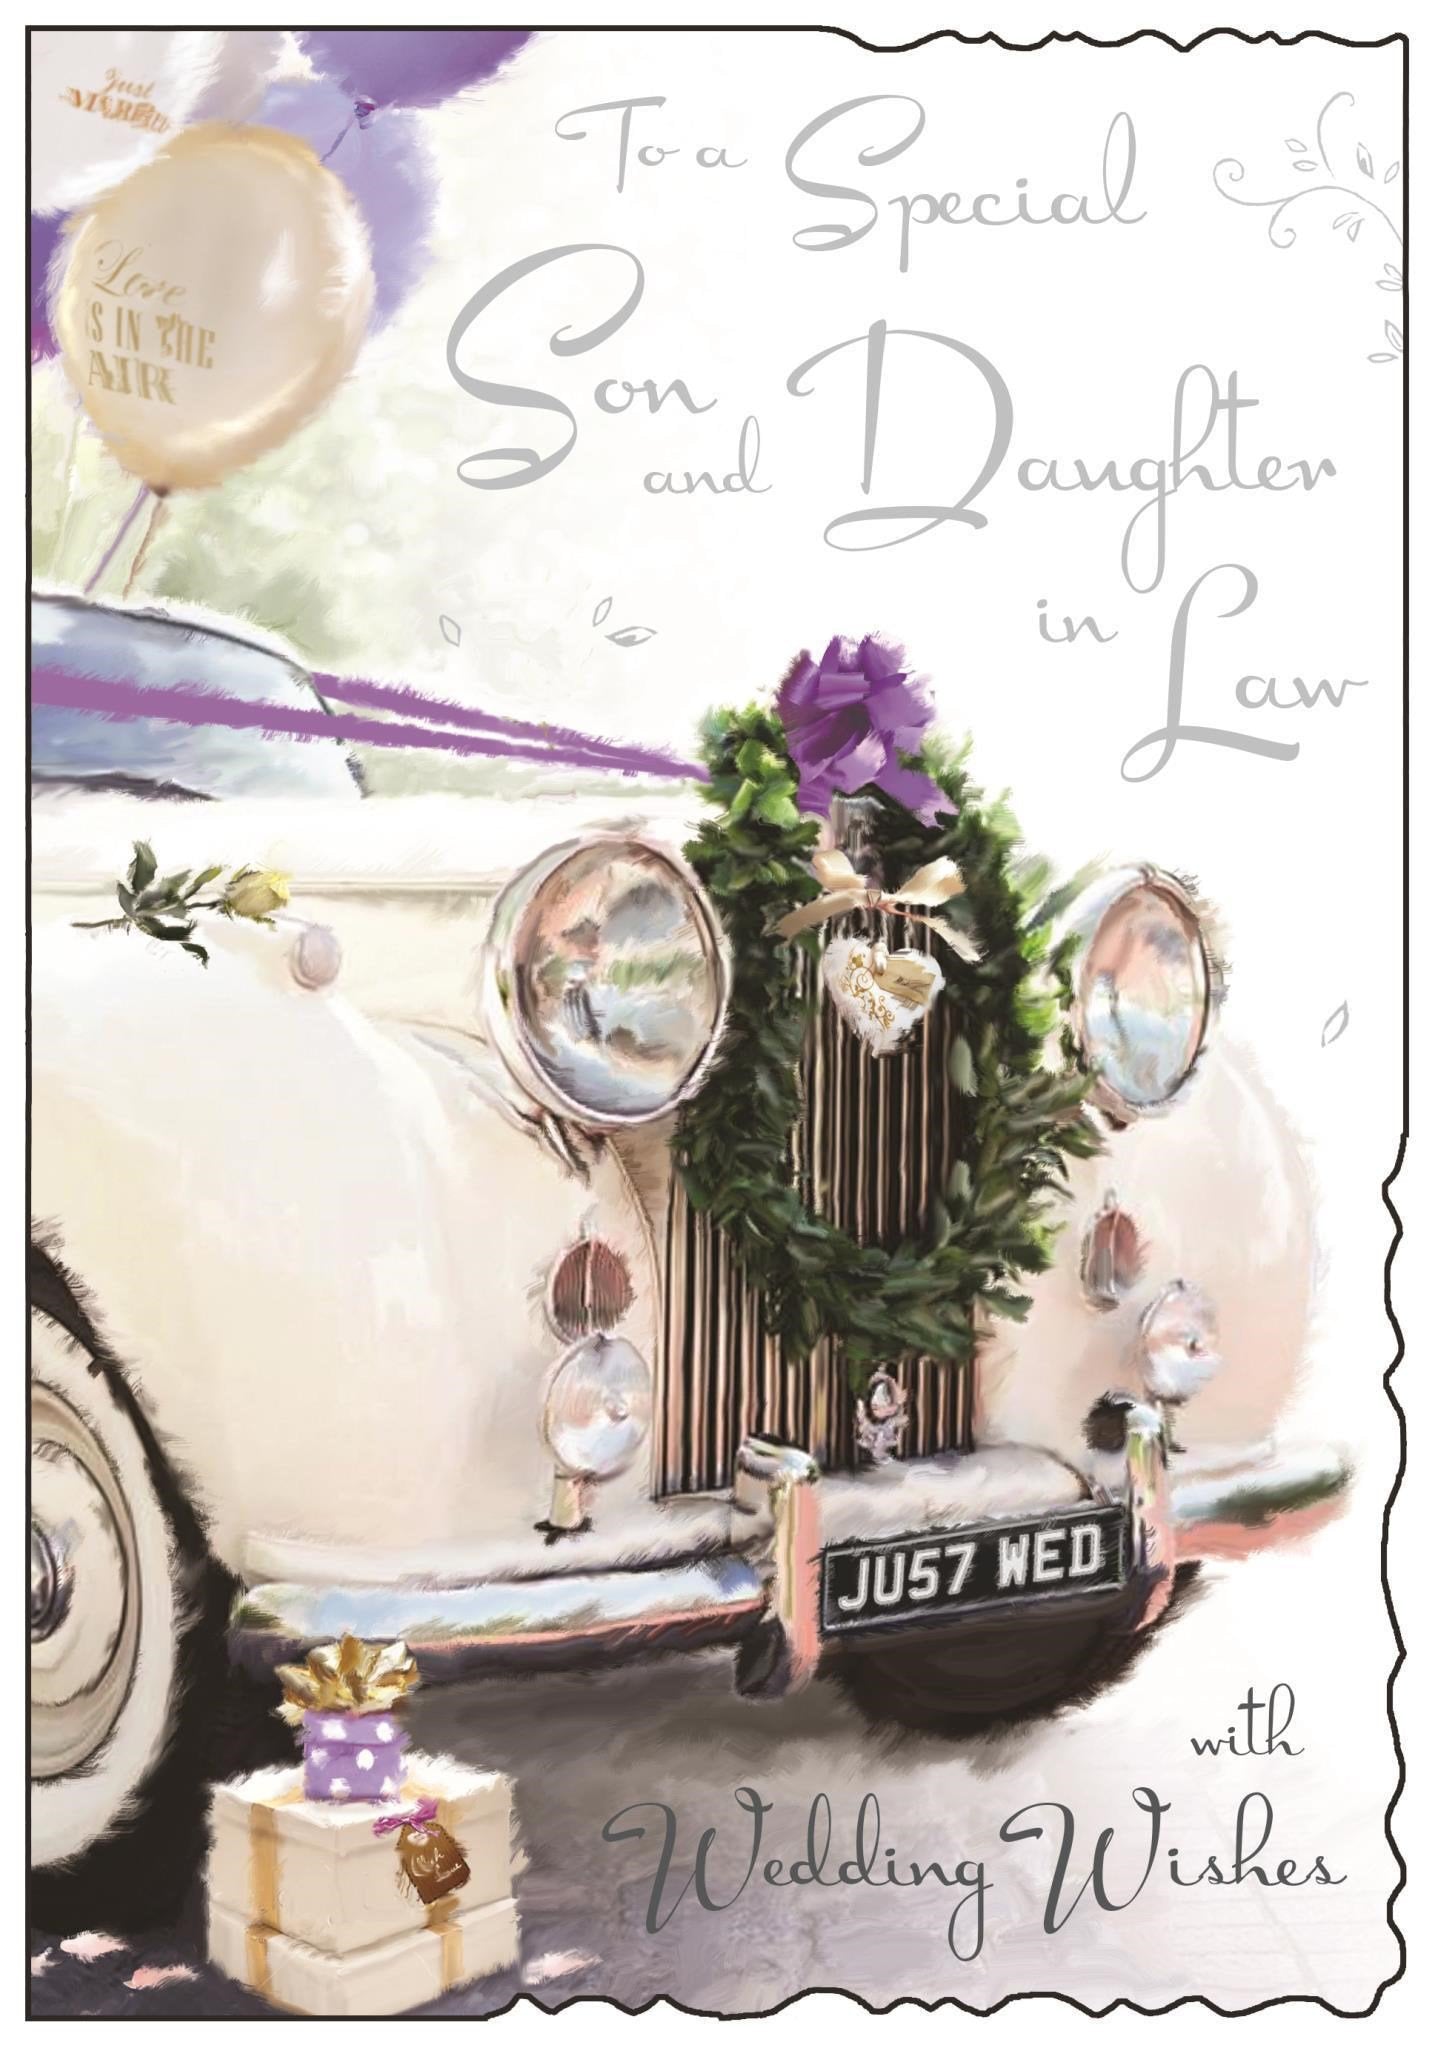 Front of Wedding Son & DIL White Car Greetings Card